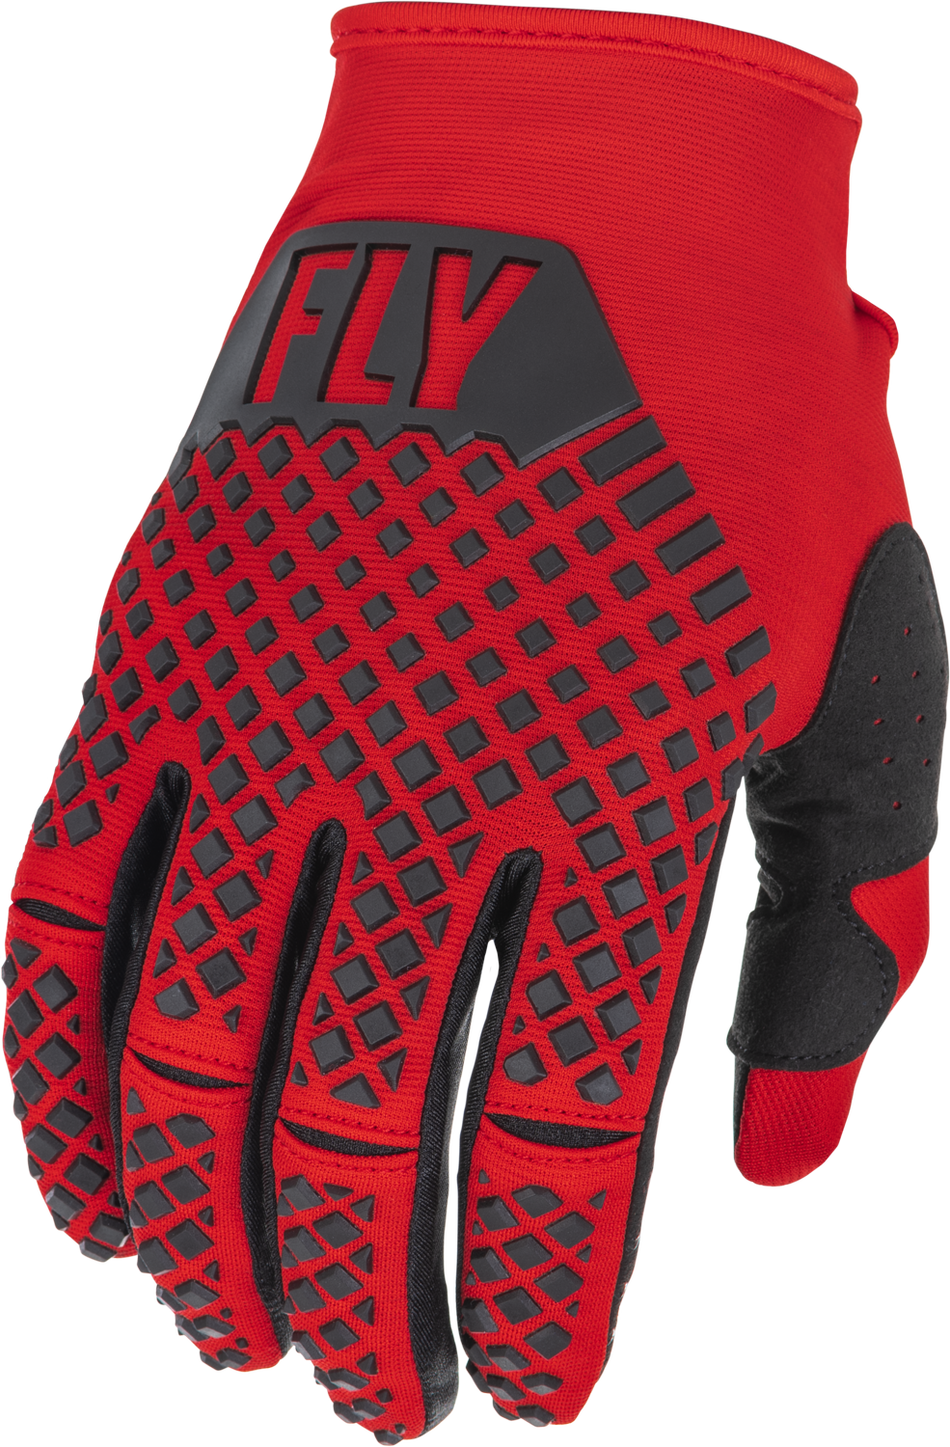 FLY RACING Kinetic Gloves Red/Black Md 375-413M